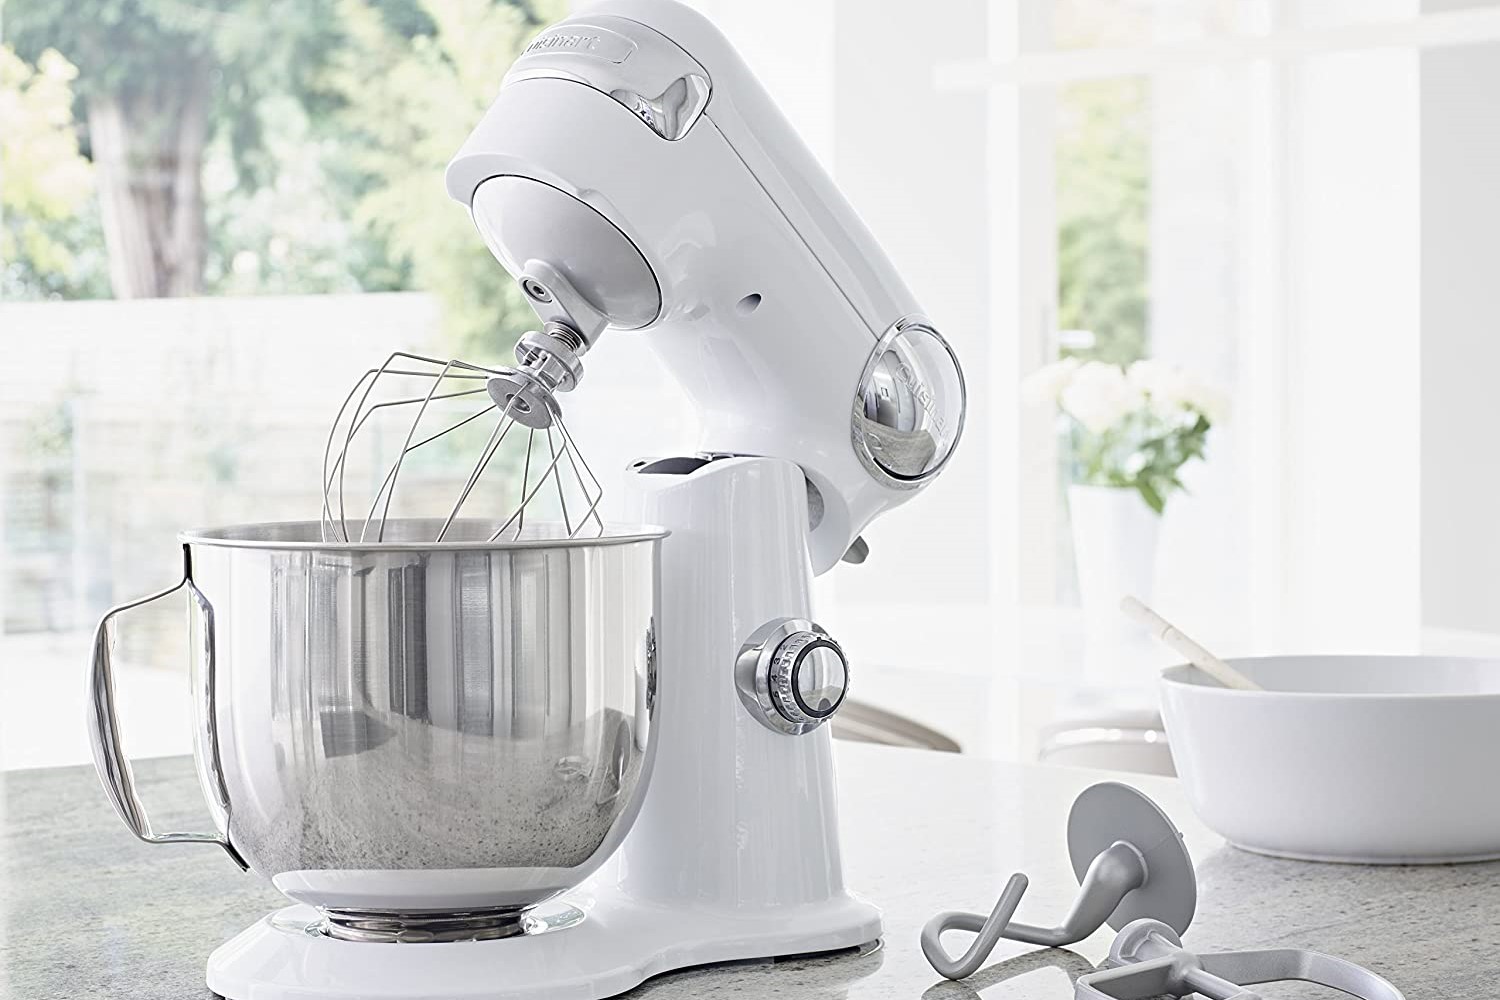 How to clean a stand mixer: in 5 easy steps